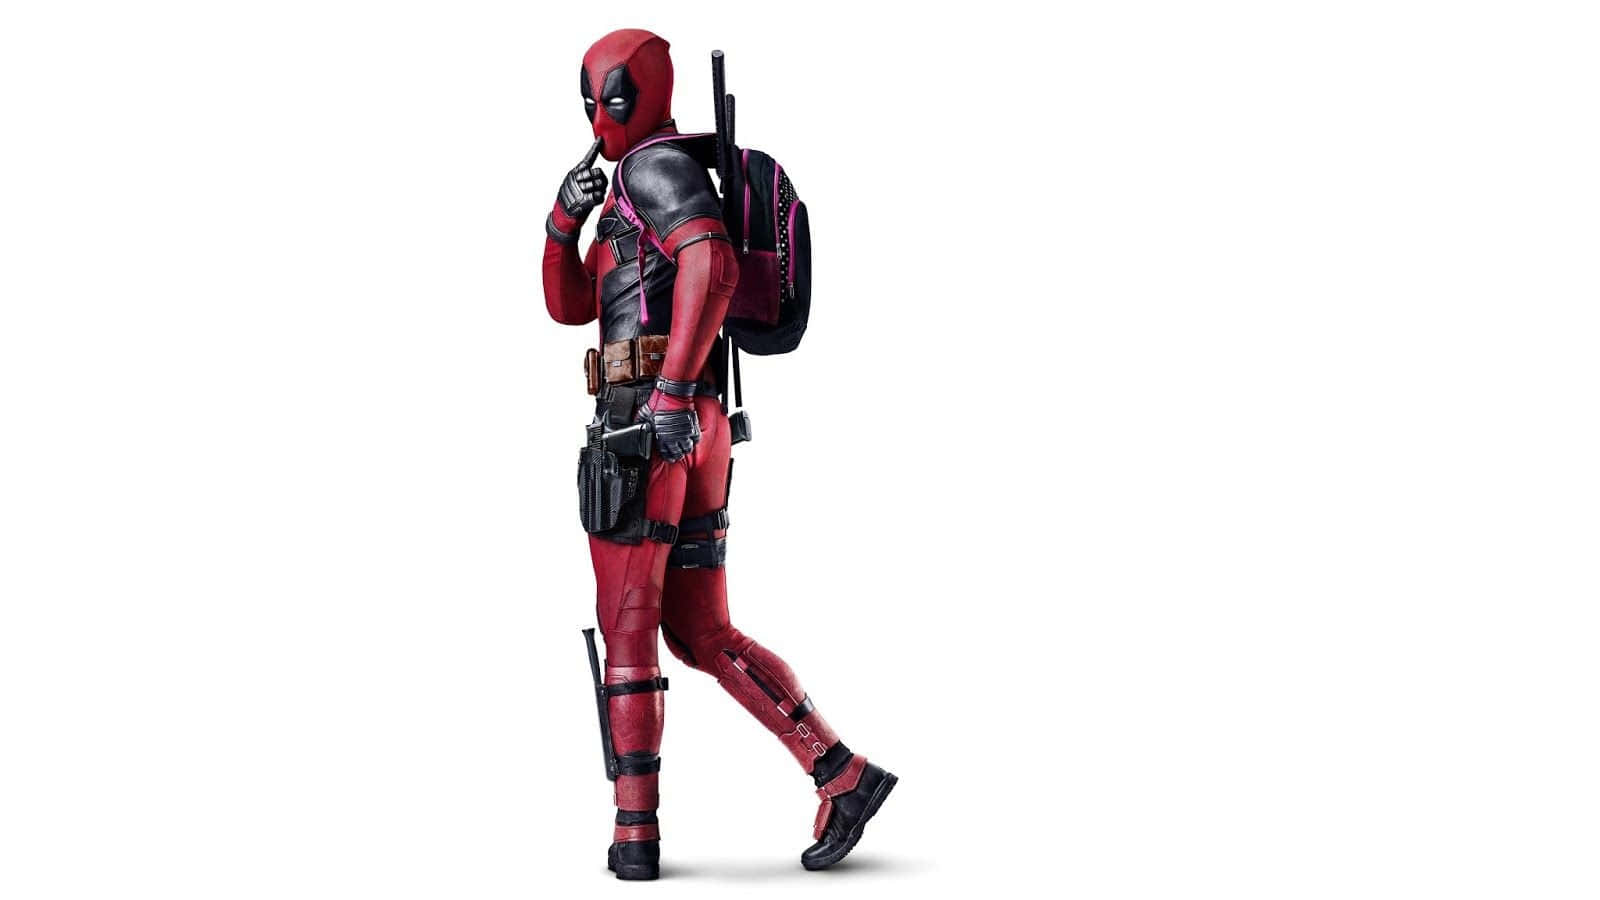 Get ready to break the fourth wall with this hysterical Deadpool moment! Wallpaper